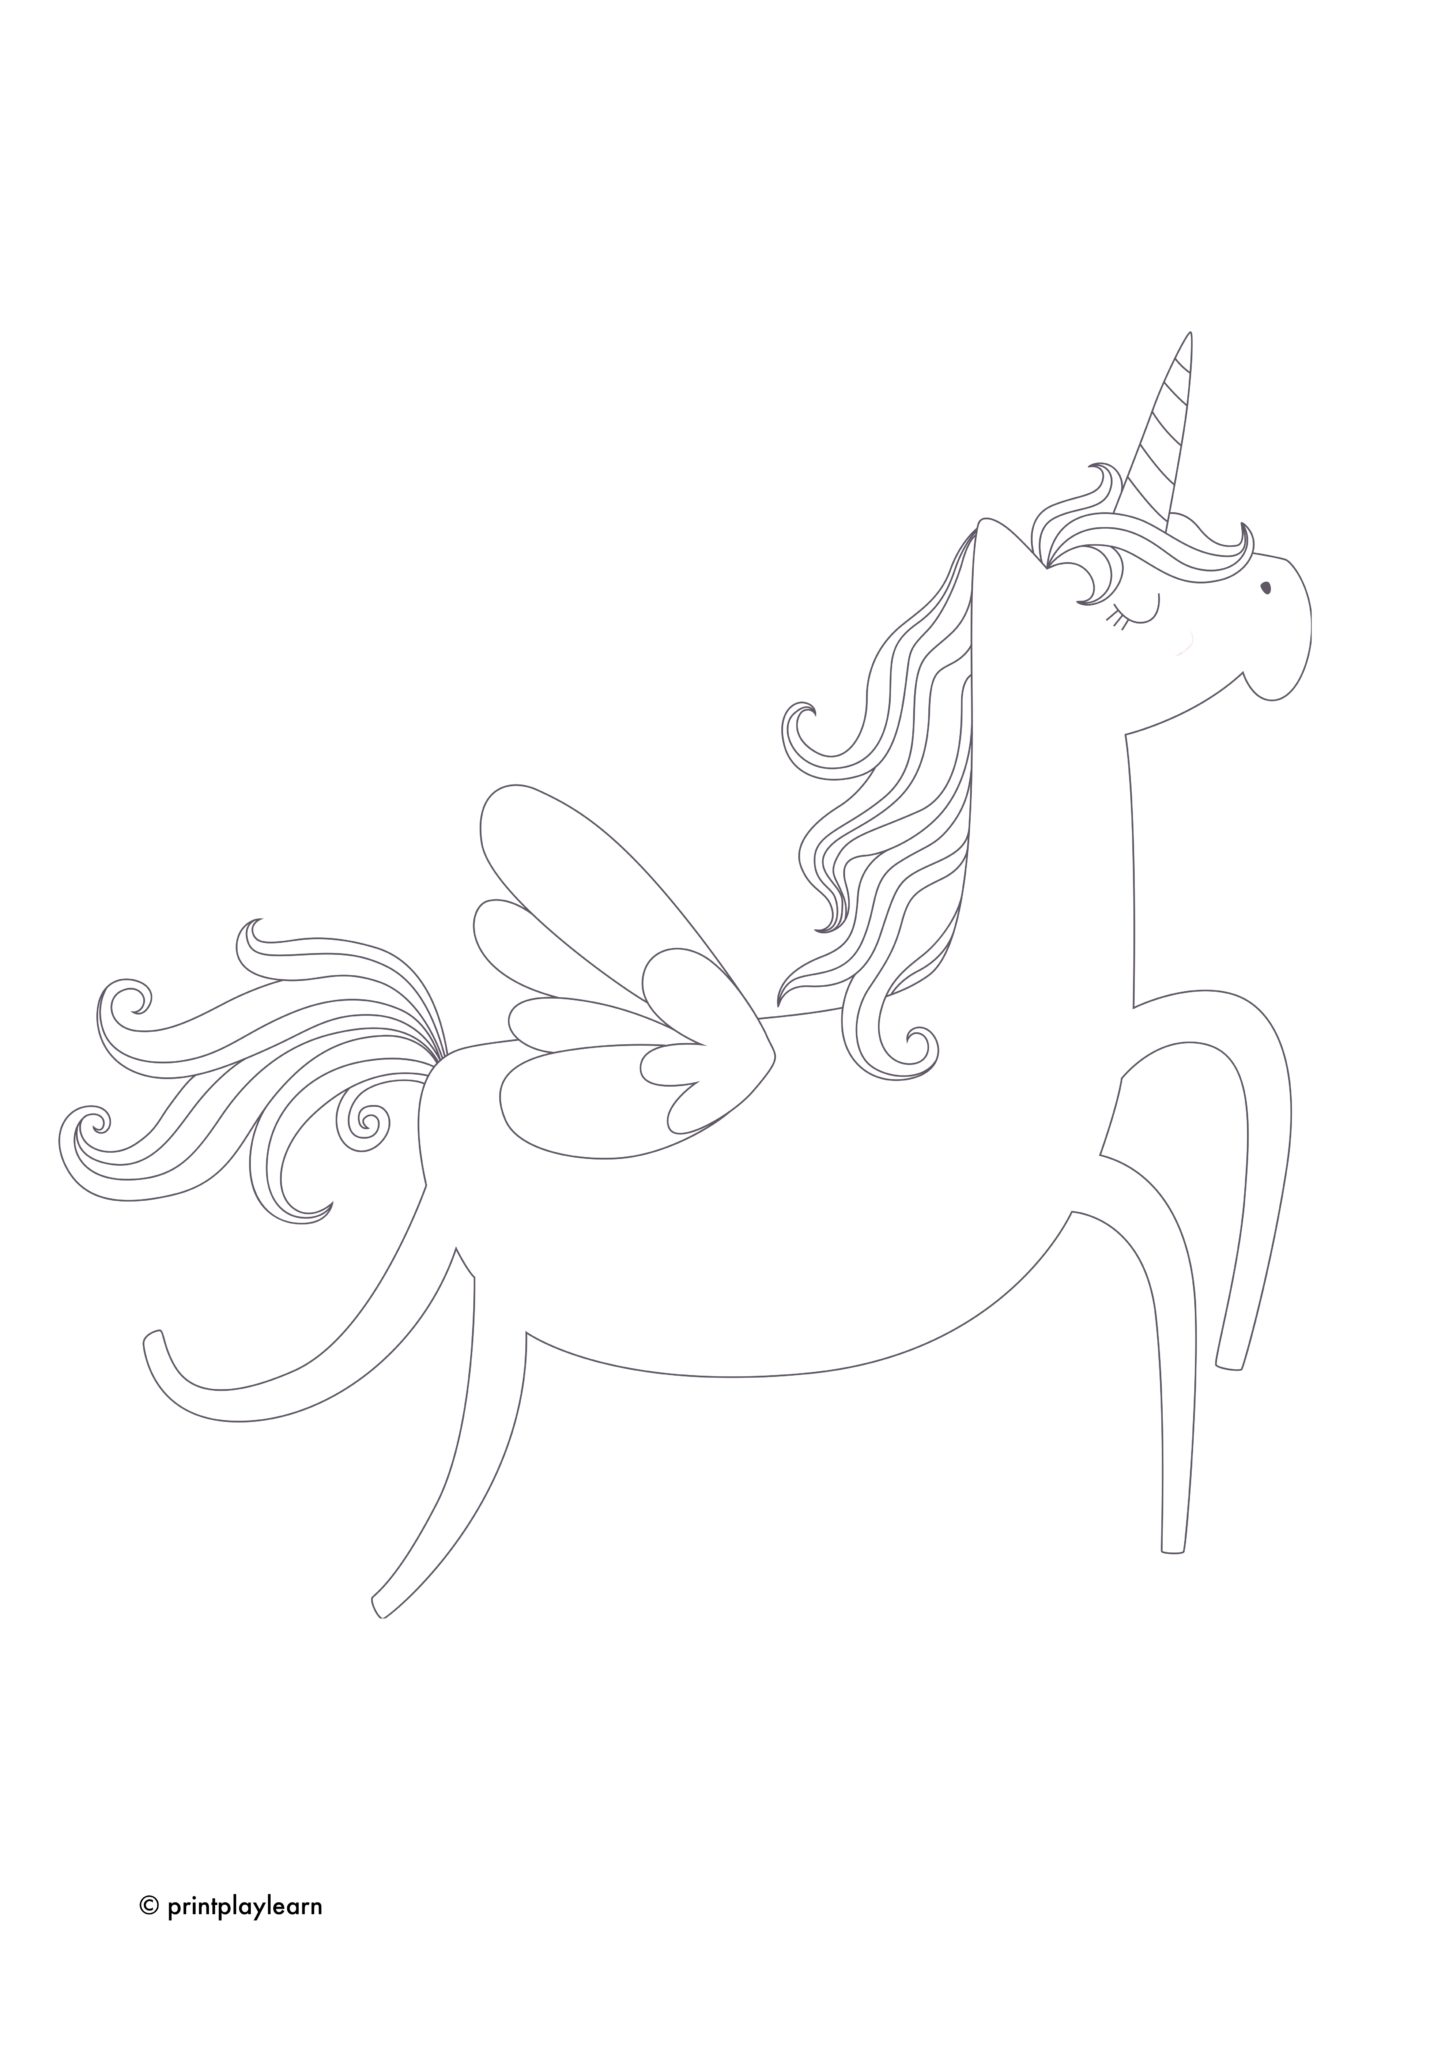 unicorn-page-1-free-teaching-resources-print-play-learn